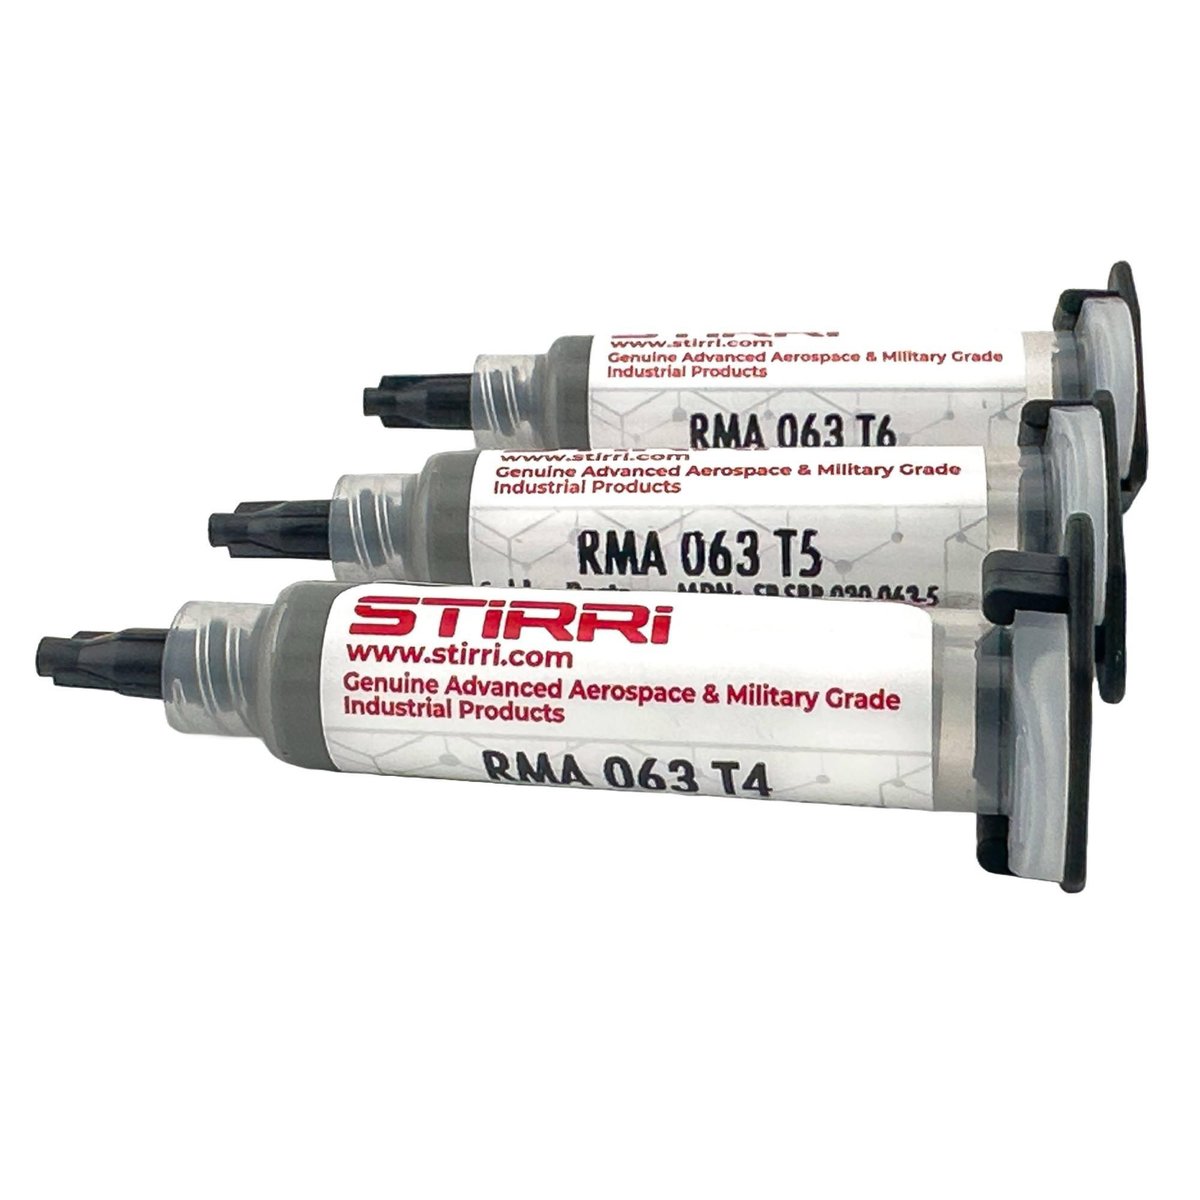 #STIRRI Classic RMA
no-clean MT rosin mildly activated #solderpaste (ROL0)
stirri.com/search?q=rma&_… 

High-quality leaded Sn/Pb solder powder made using virgin #rawmaterials.

All of our products are proudly made in the USA, being fully REACH-compliant.